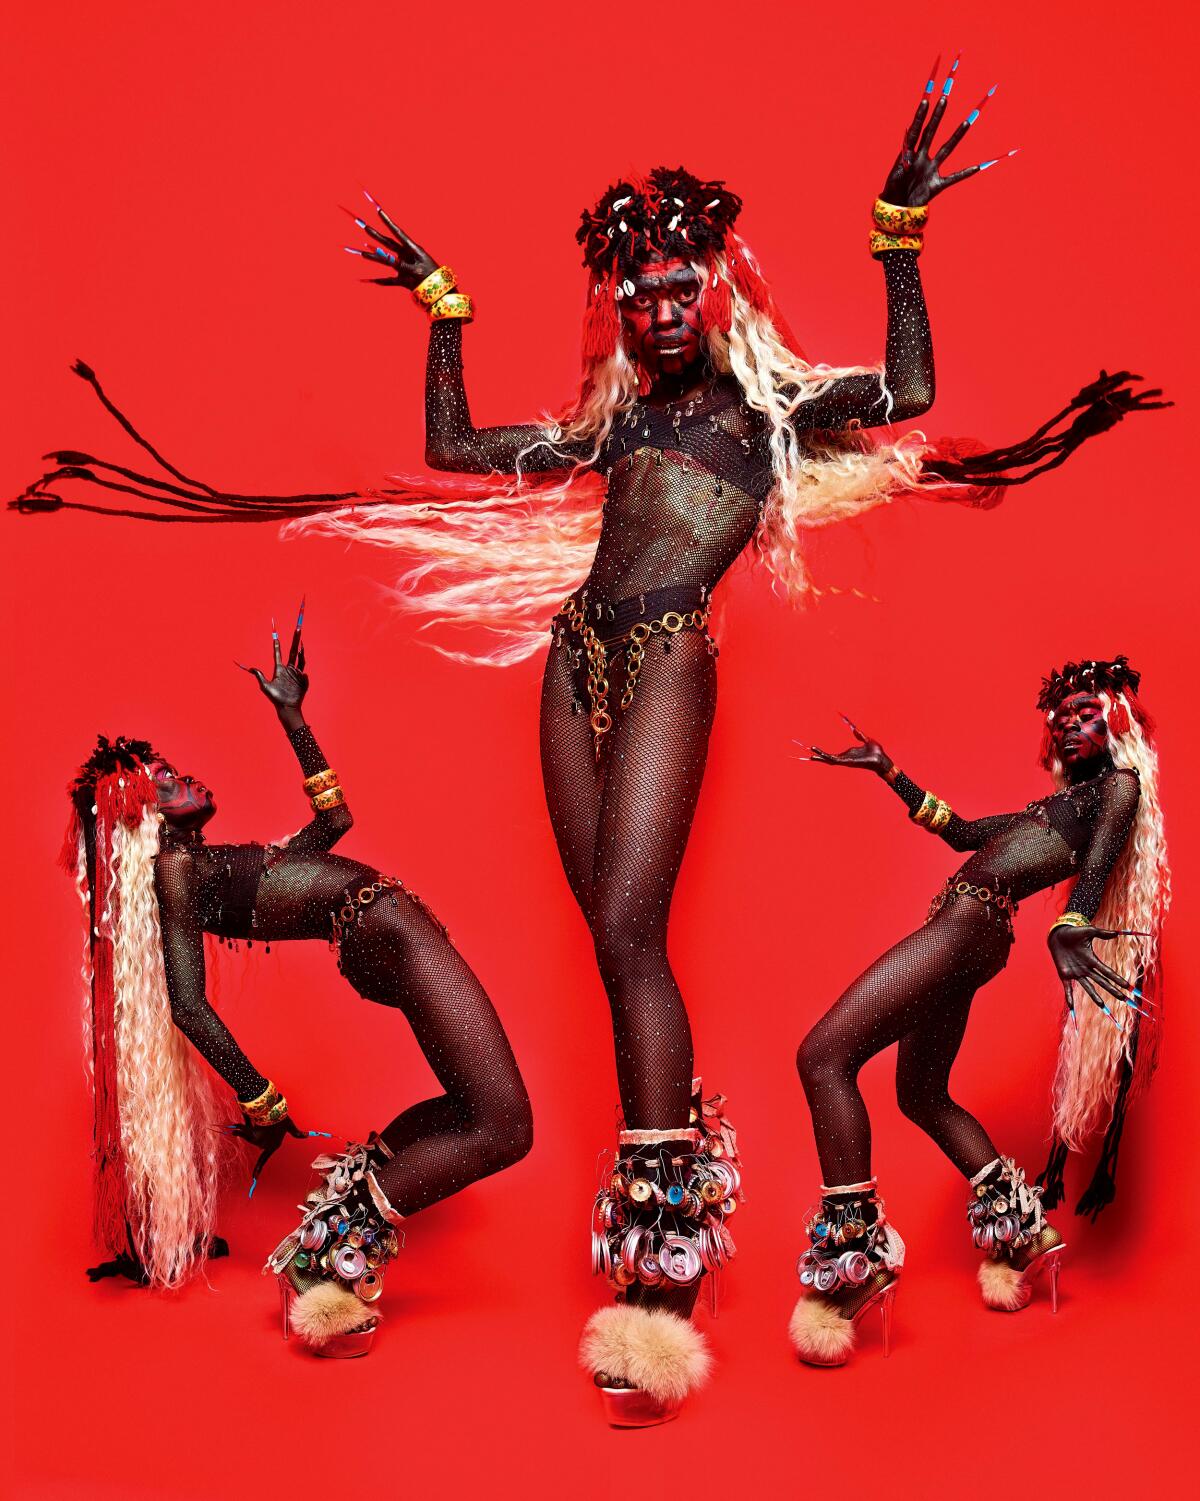 Three nearly naked people pose in front of a bright red background with long, multi-colored hair.